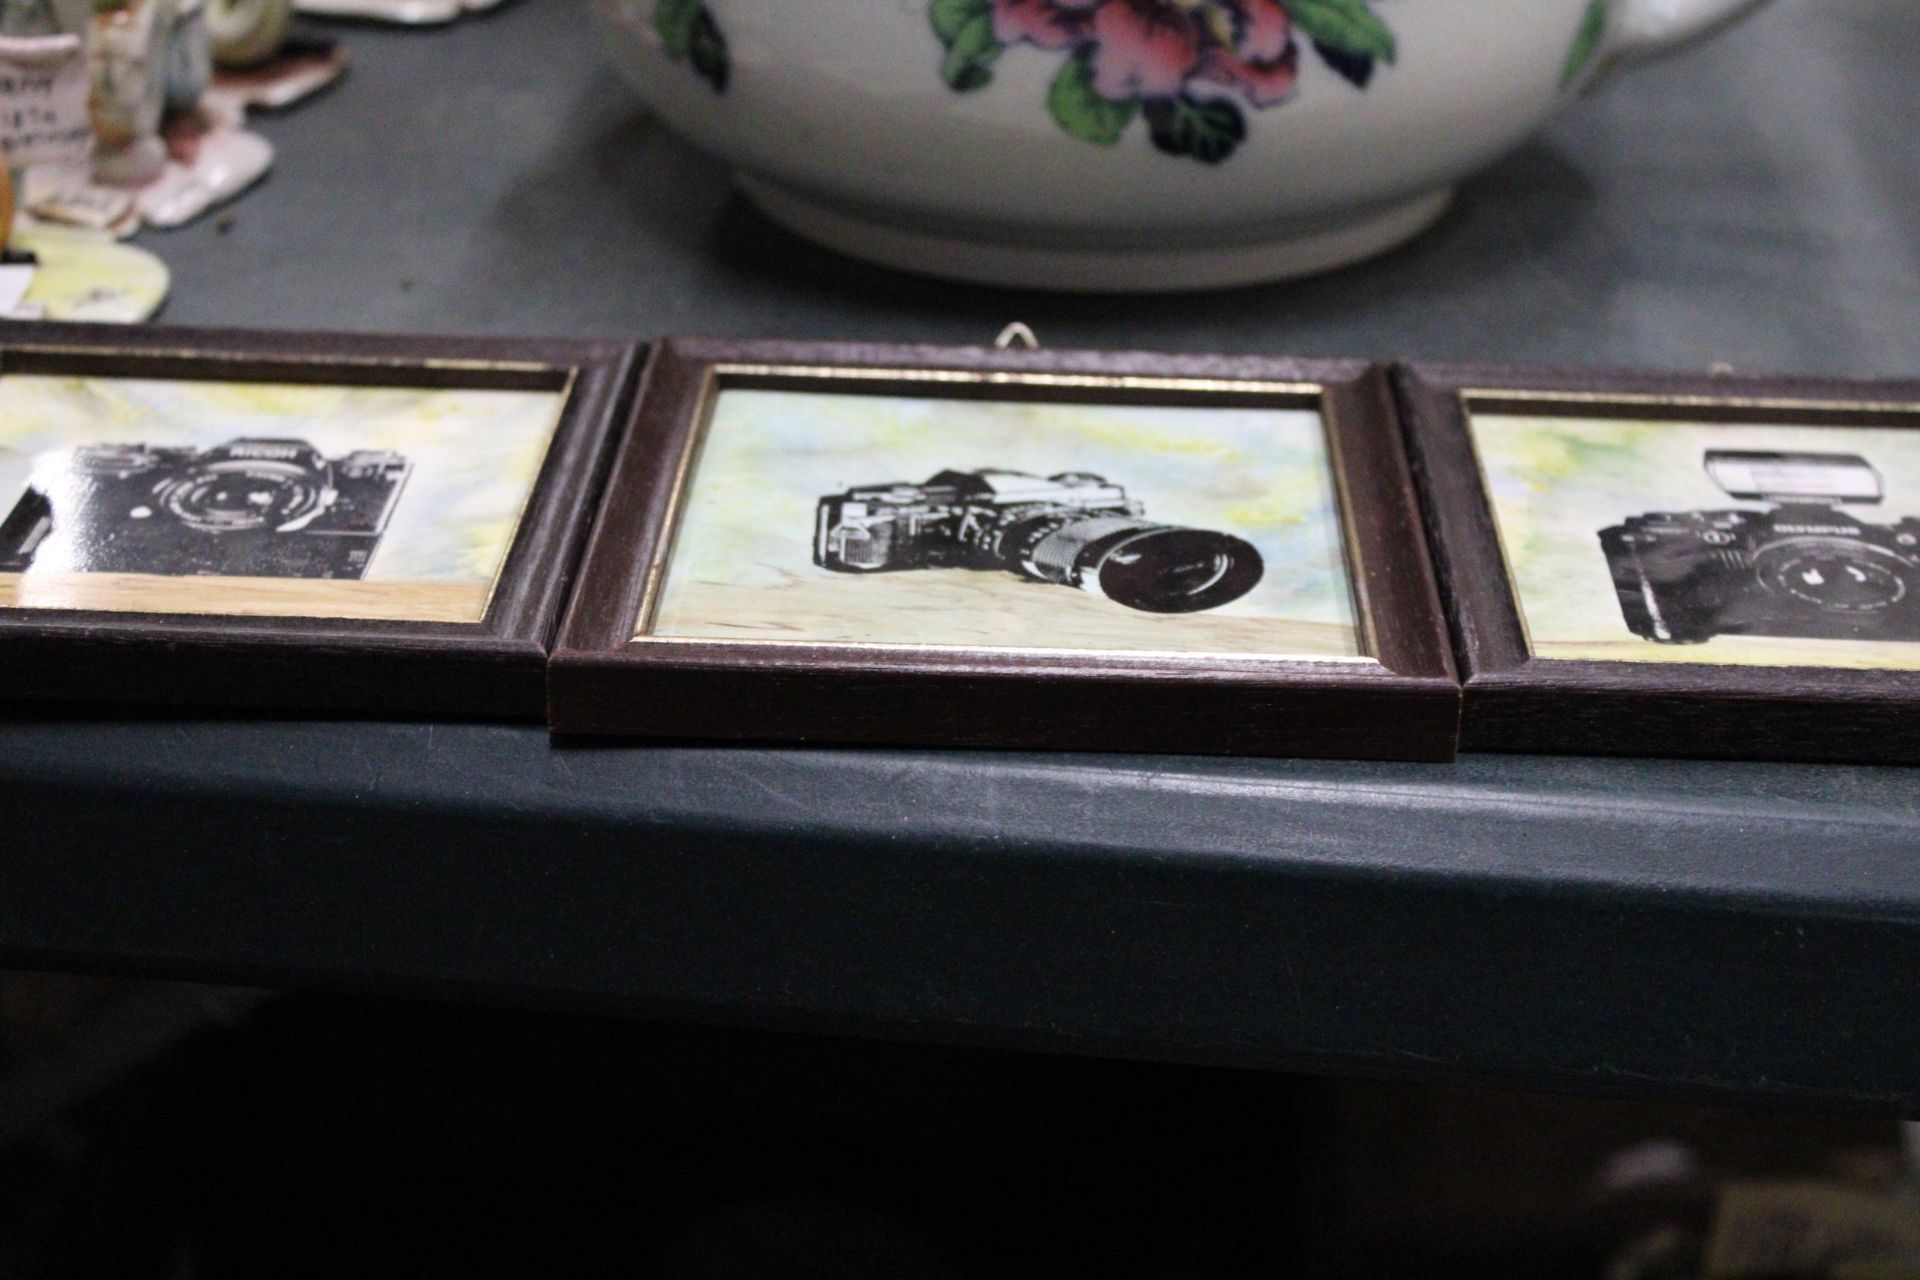 ASET OF THREE HAND PAINTED TILES OF CAMERAS - Image 5 of 5